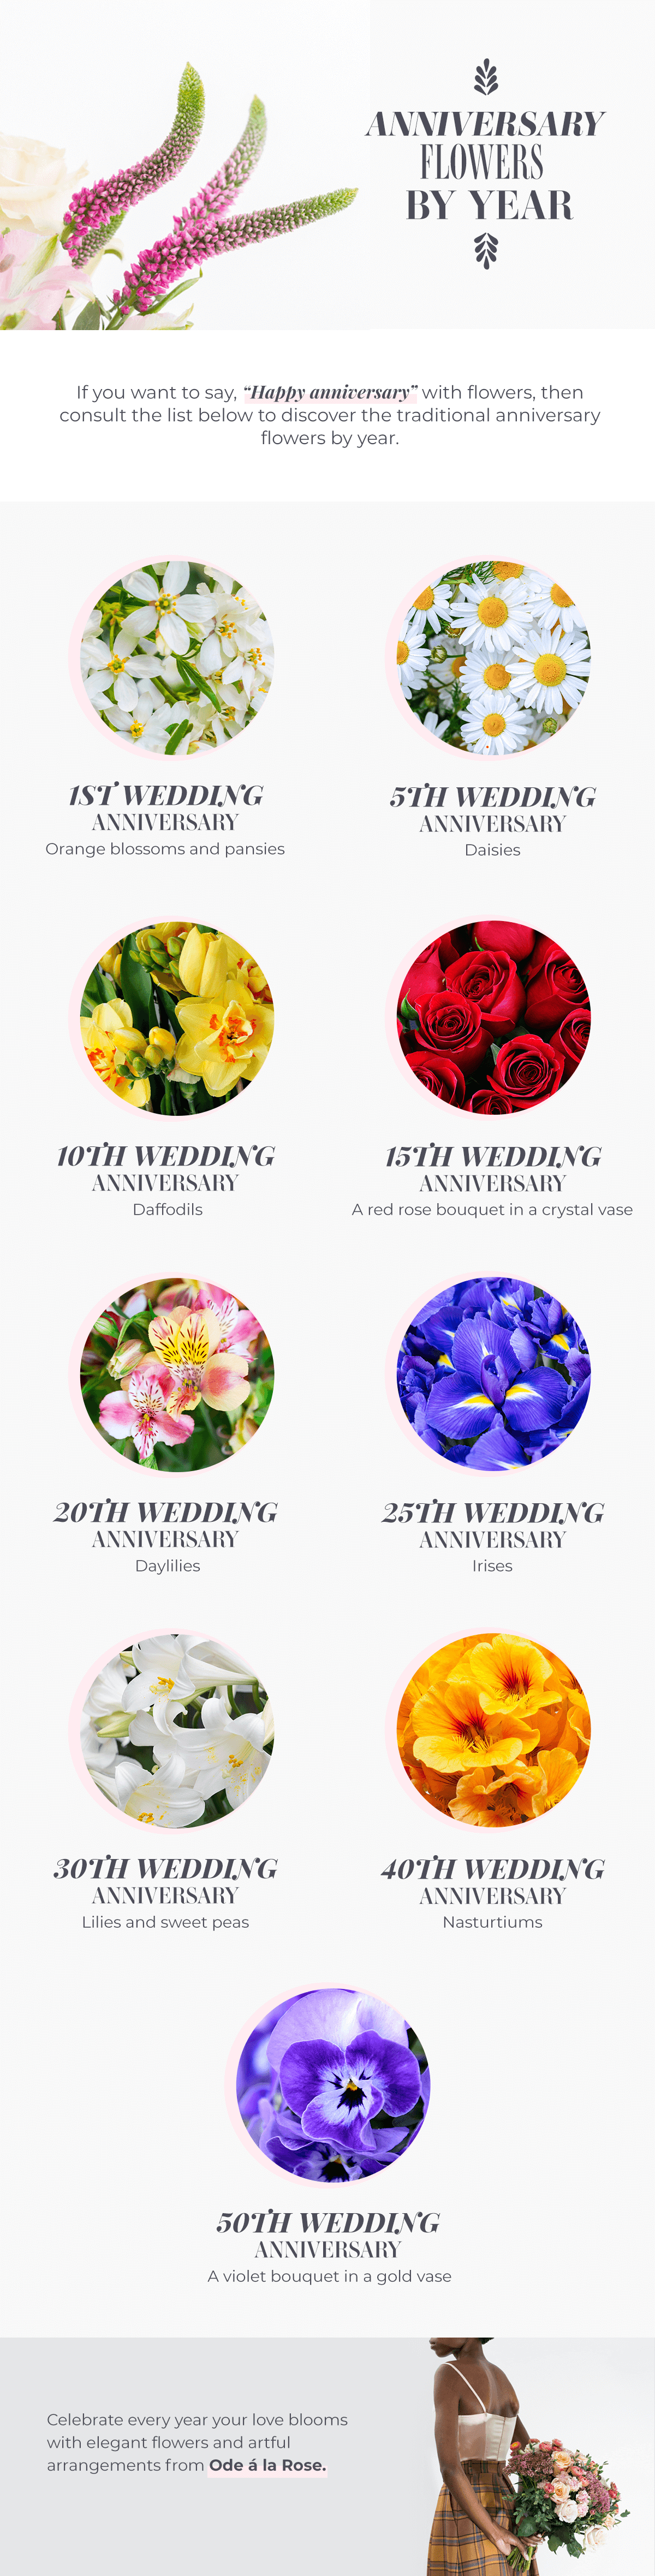 anniversary flowers by year